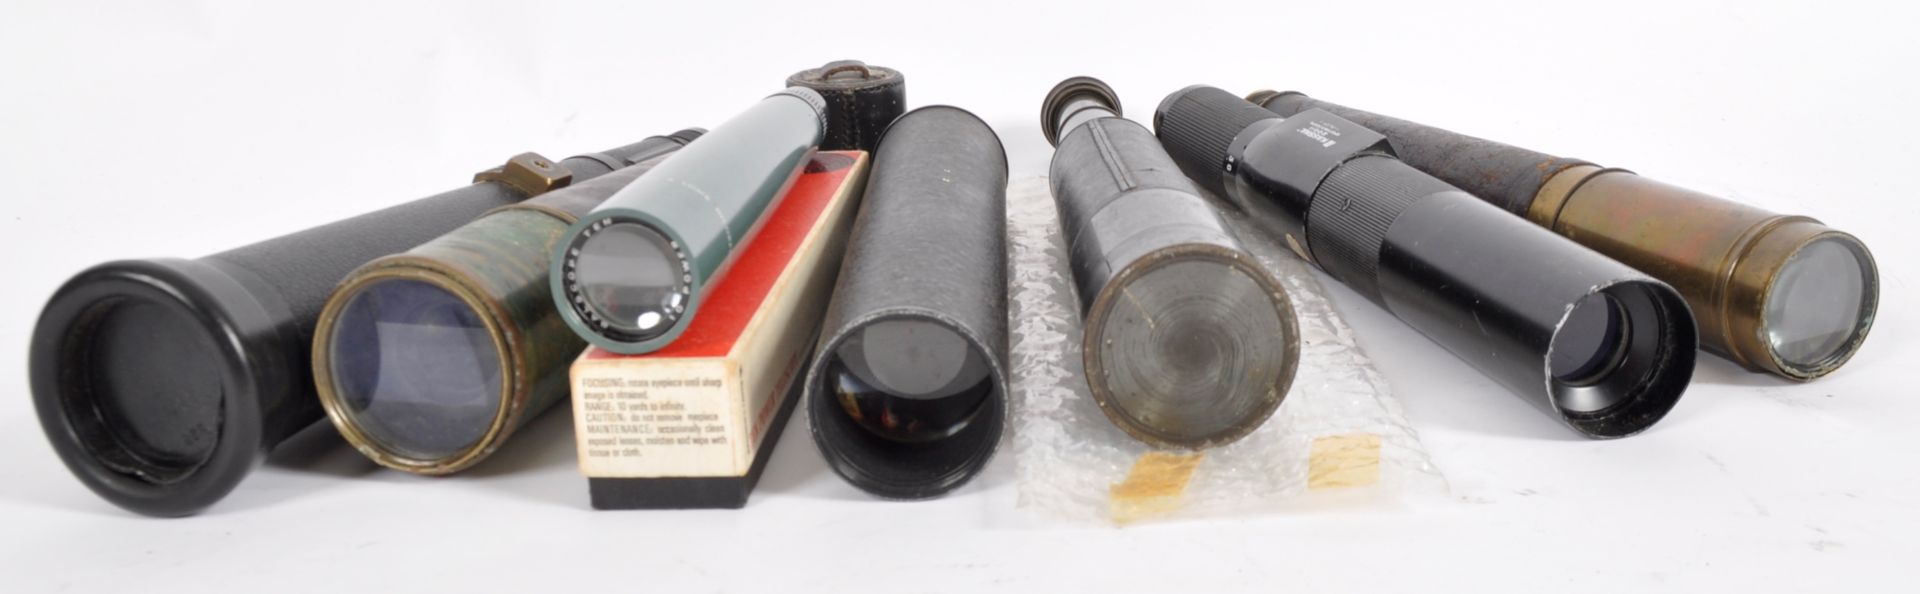 COLLECTION OF VINTAGE TELESCOPES & SPOTTING SCOPES - Image 2 of 7